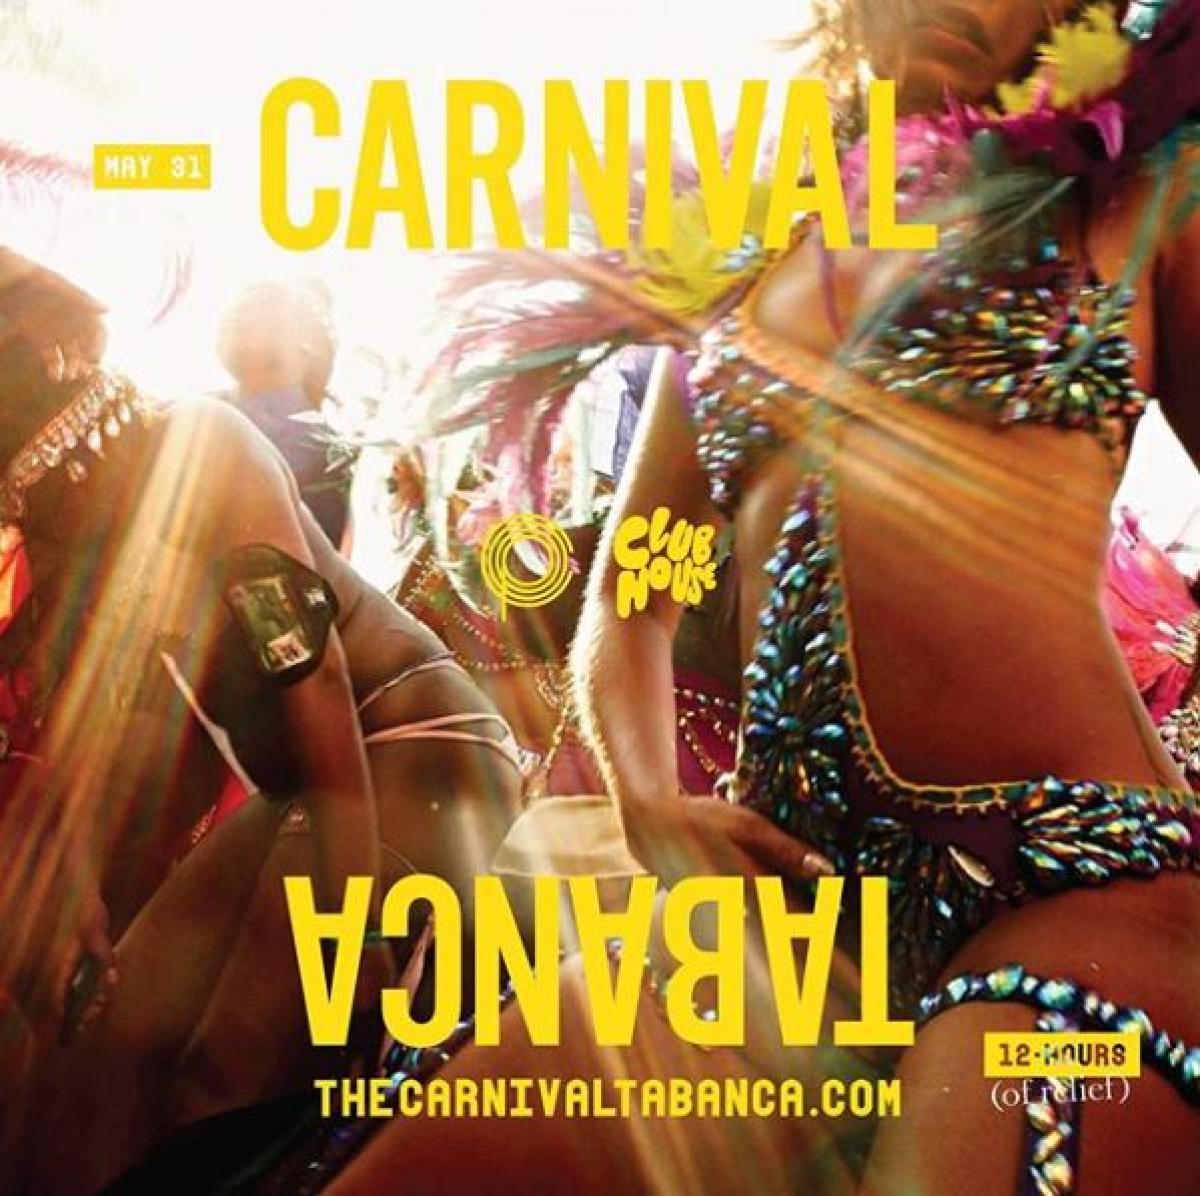 Carnival Tabanca flyer or graphic.